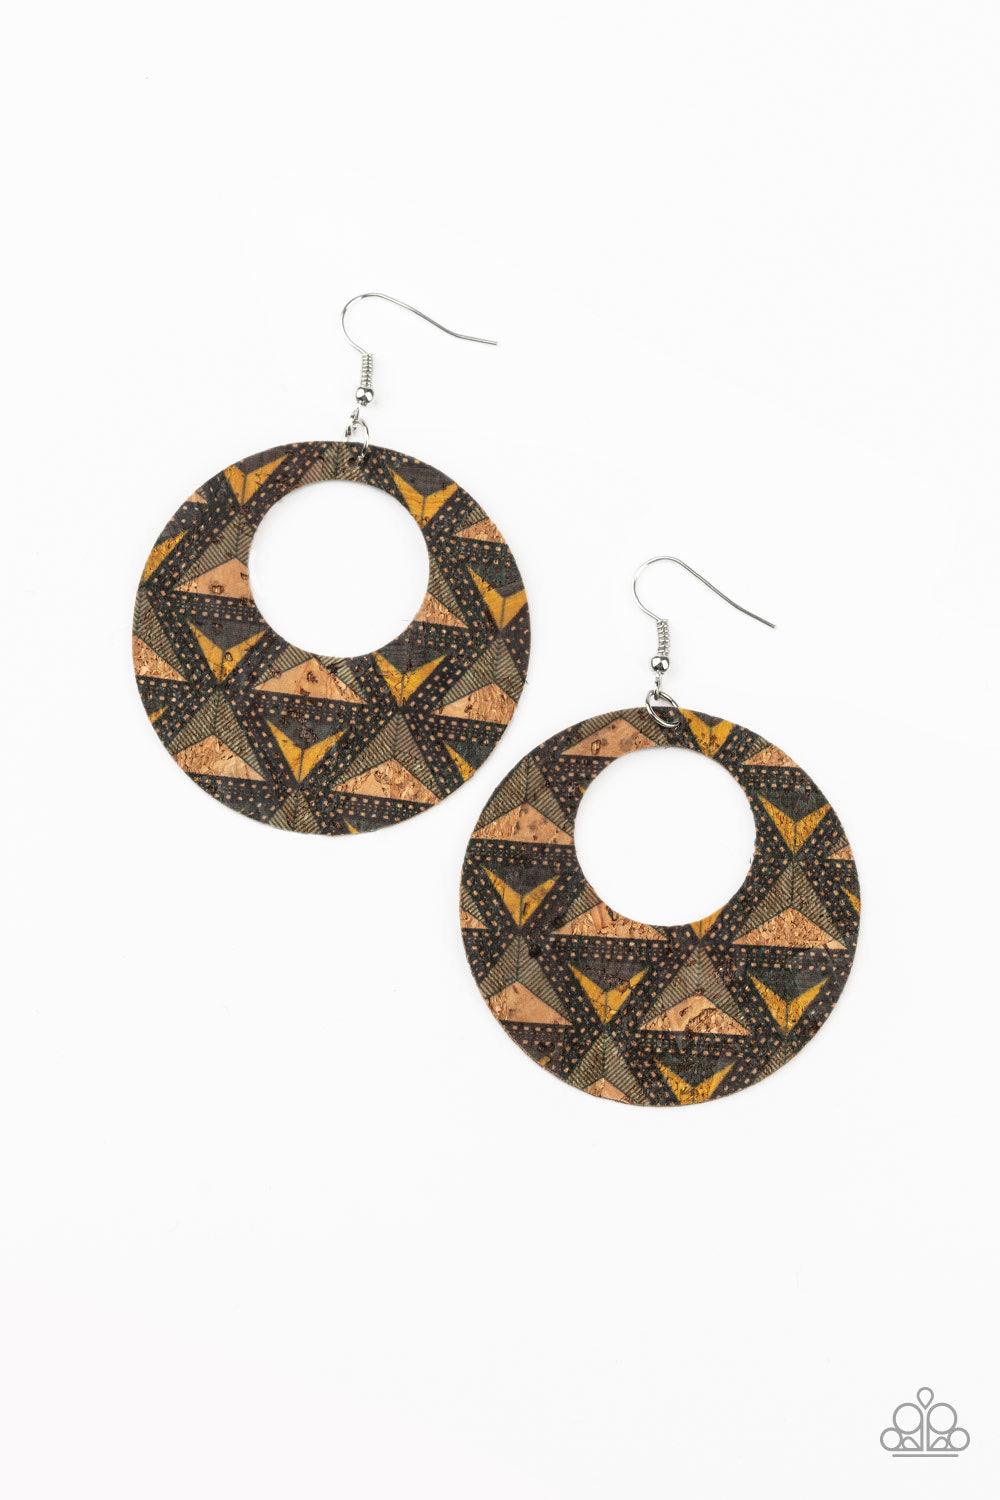 Paparazzi Accessories Put A Cork In It - Multi Featuring colorful geometric detail, a cork-like hoop swings from the ear for a seasonal look. Earring attaches to a standard fishhook fitting. Jewelry